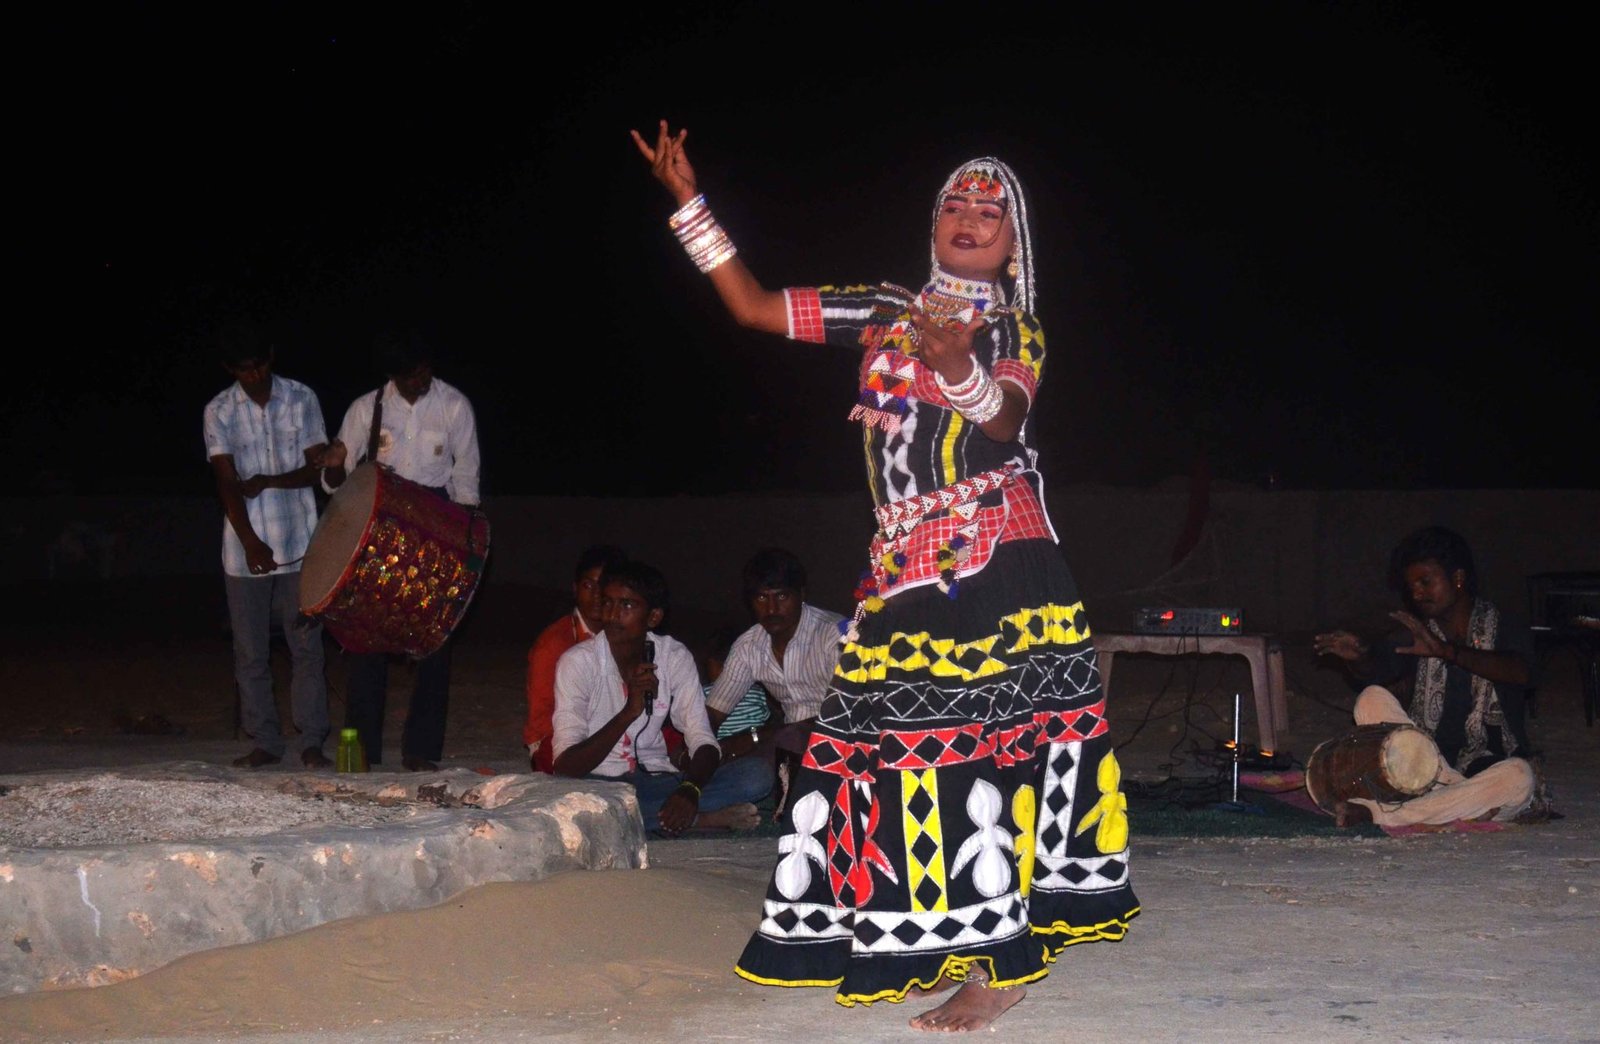 Dance during desert camping by Travel Jaunts